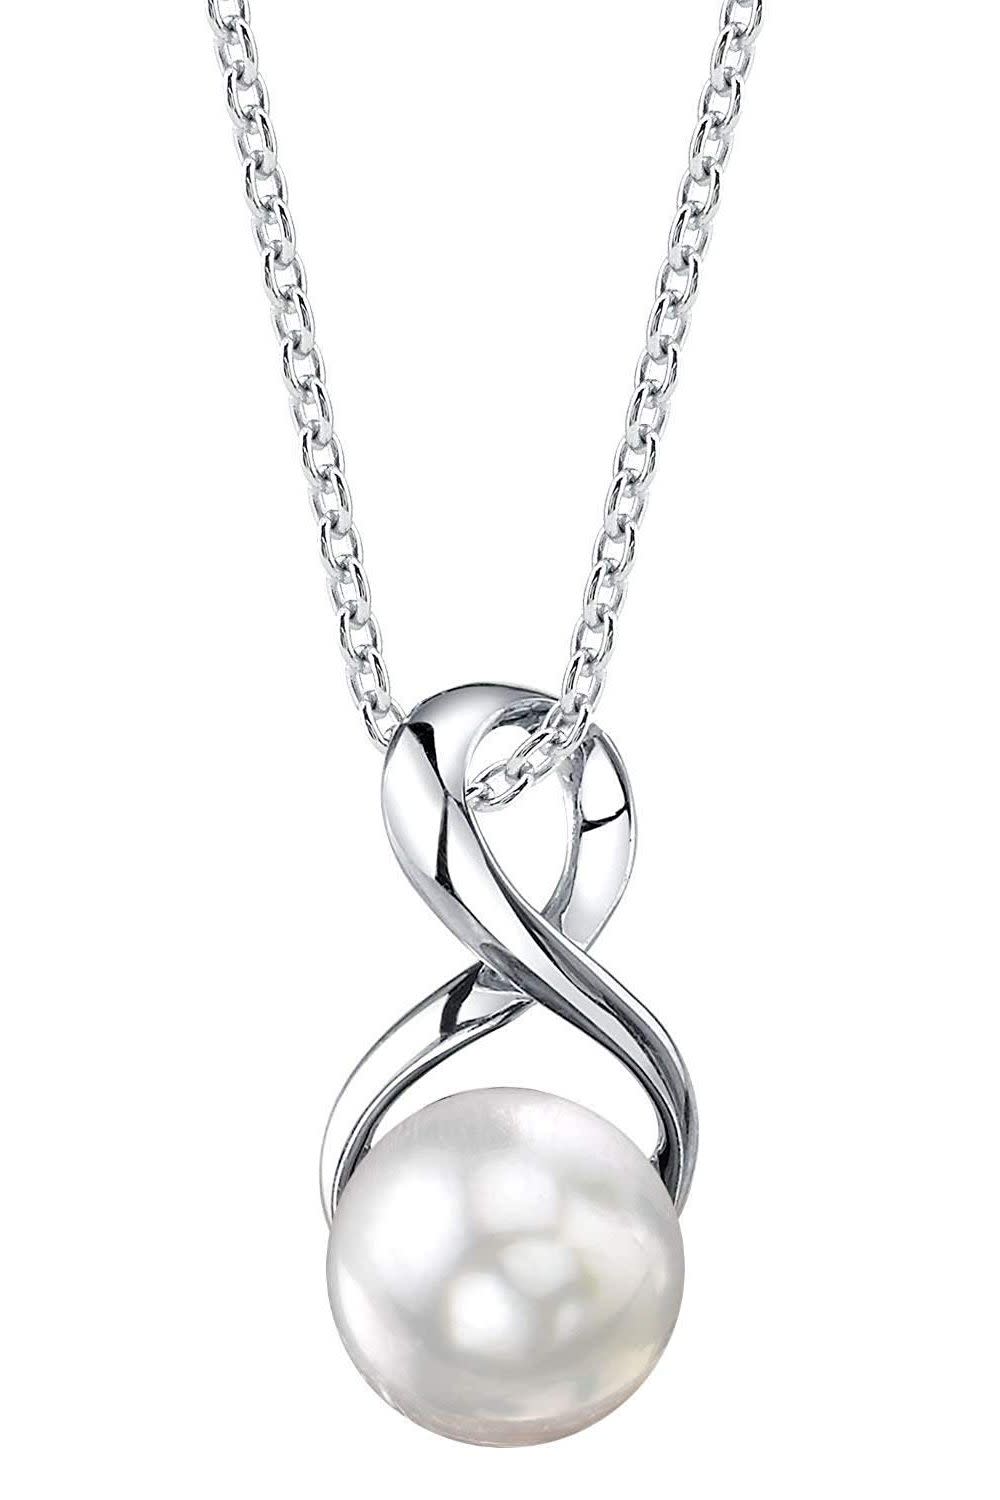 The Pearl Source Pearl Infinity Necklace